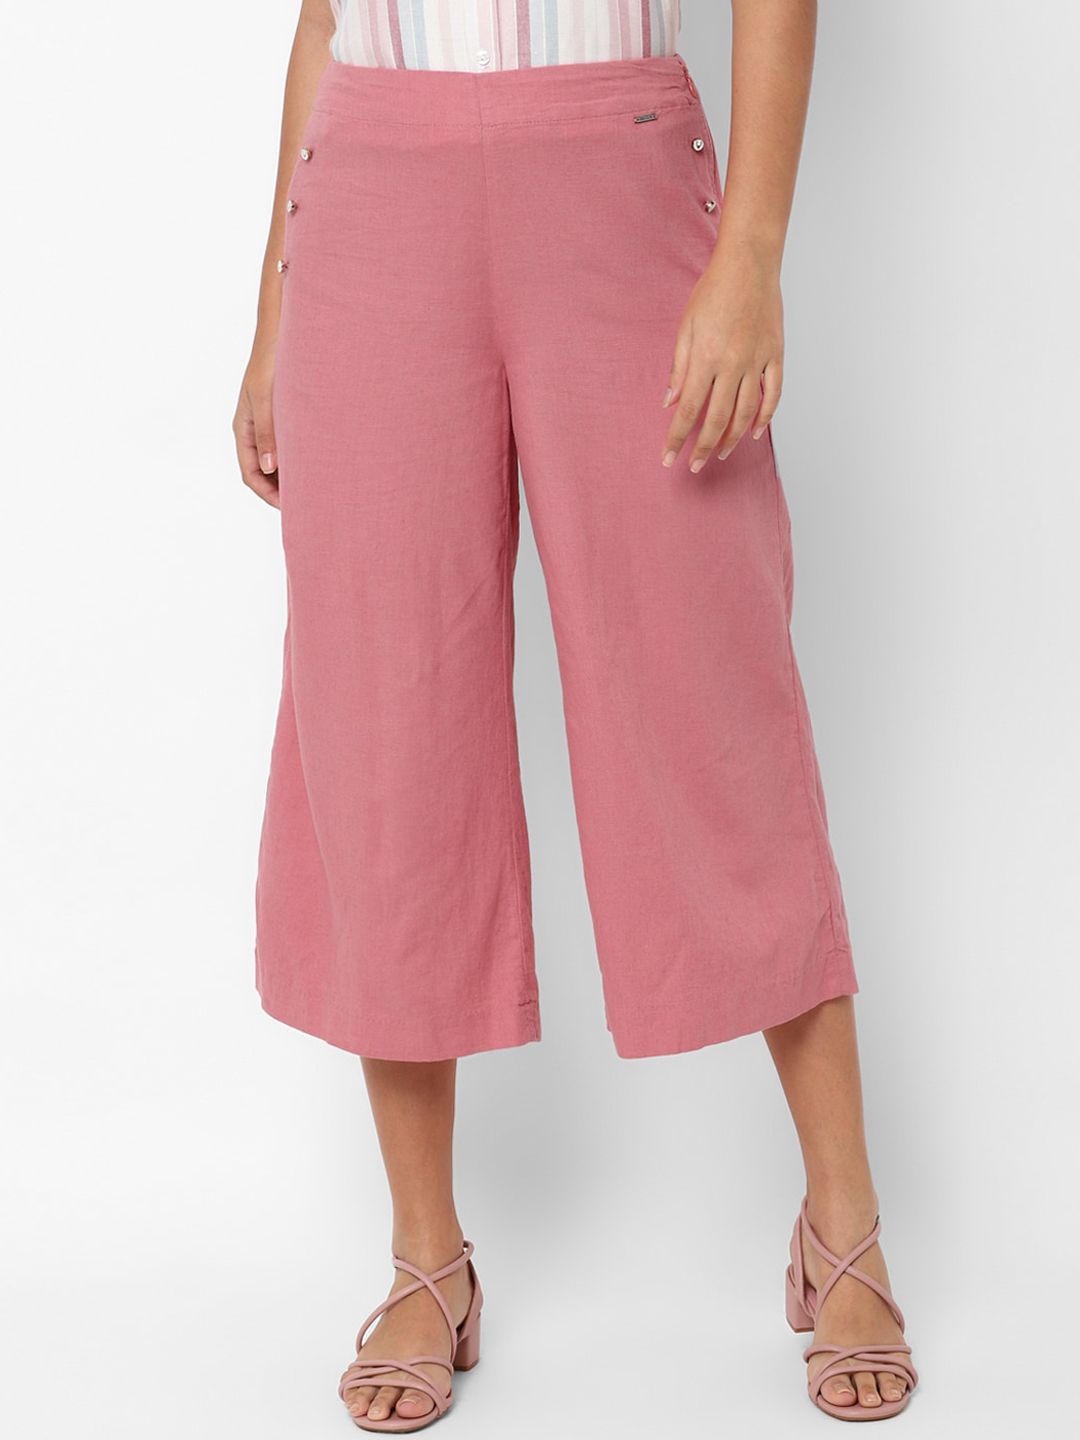 Allen Solly Woman Women Pink Culottes Trousers Price in India